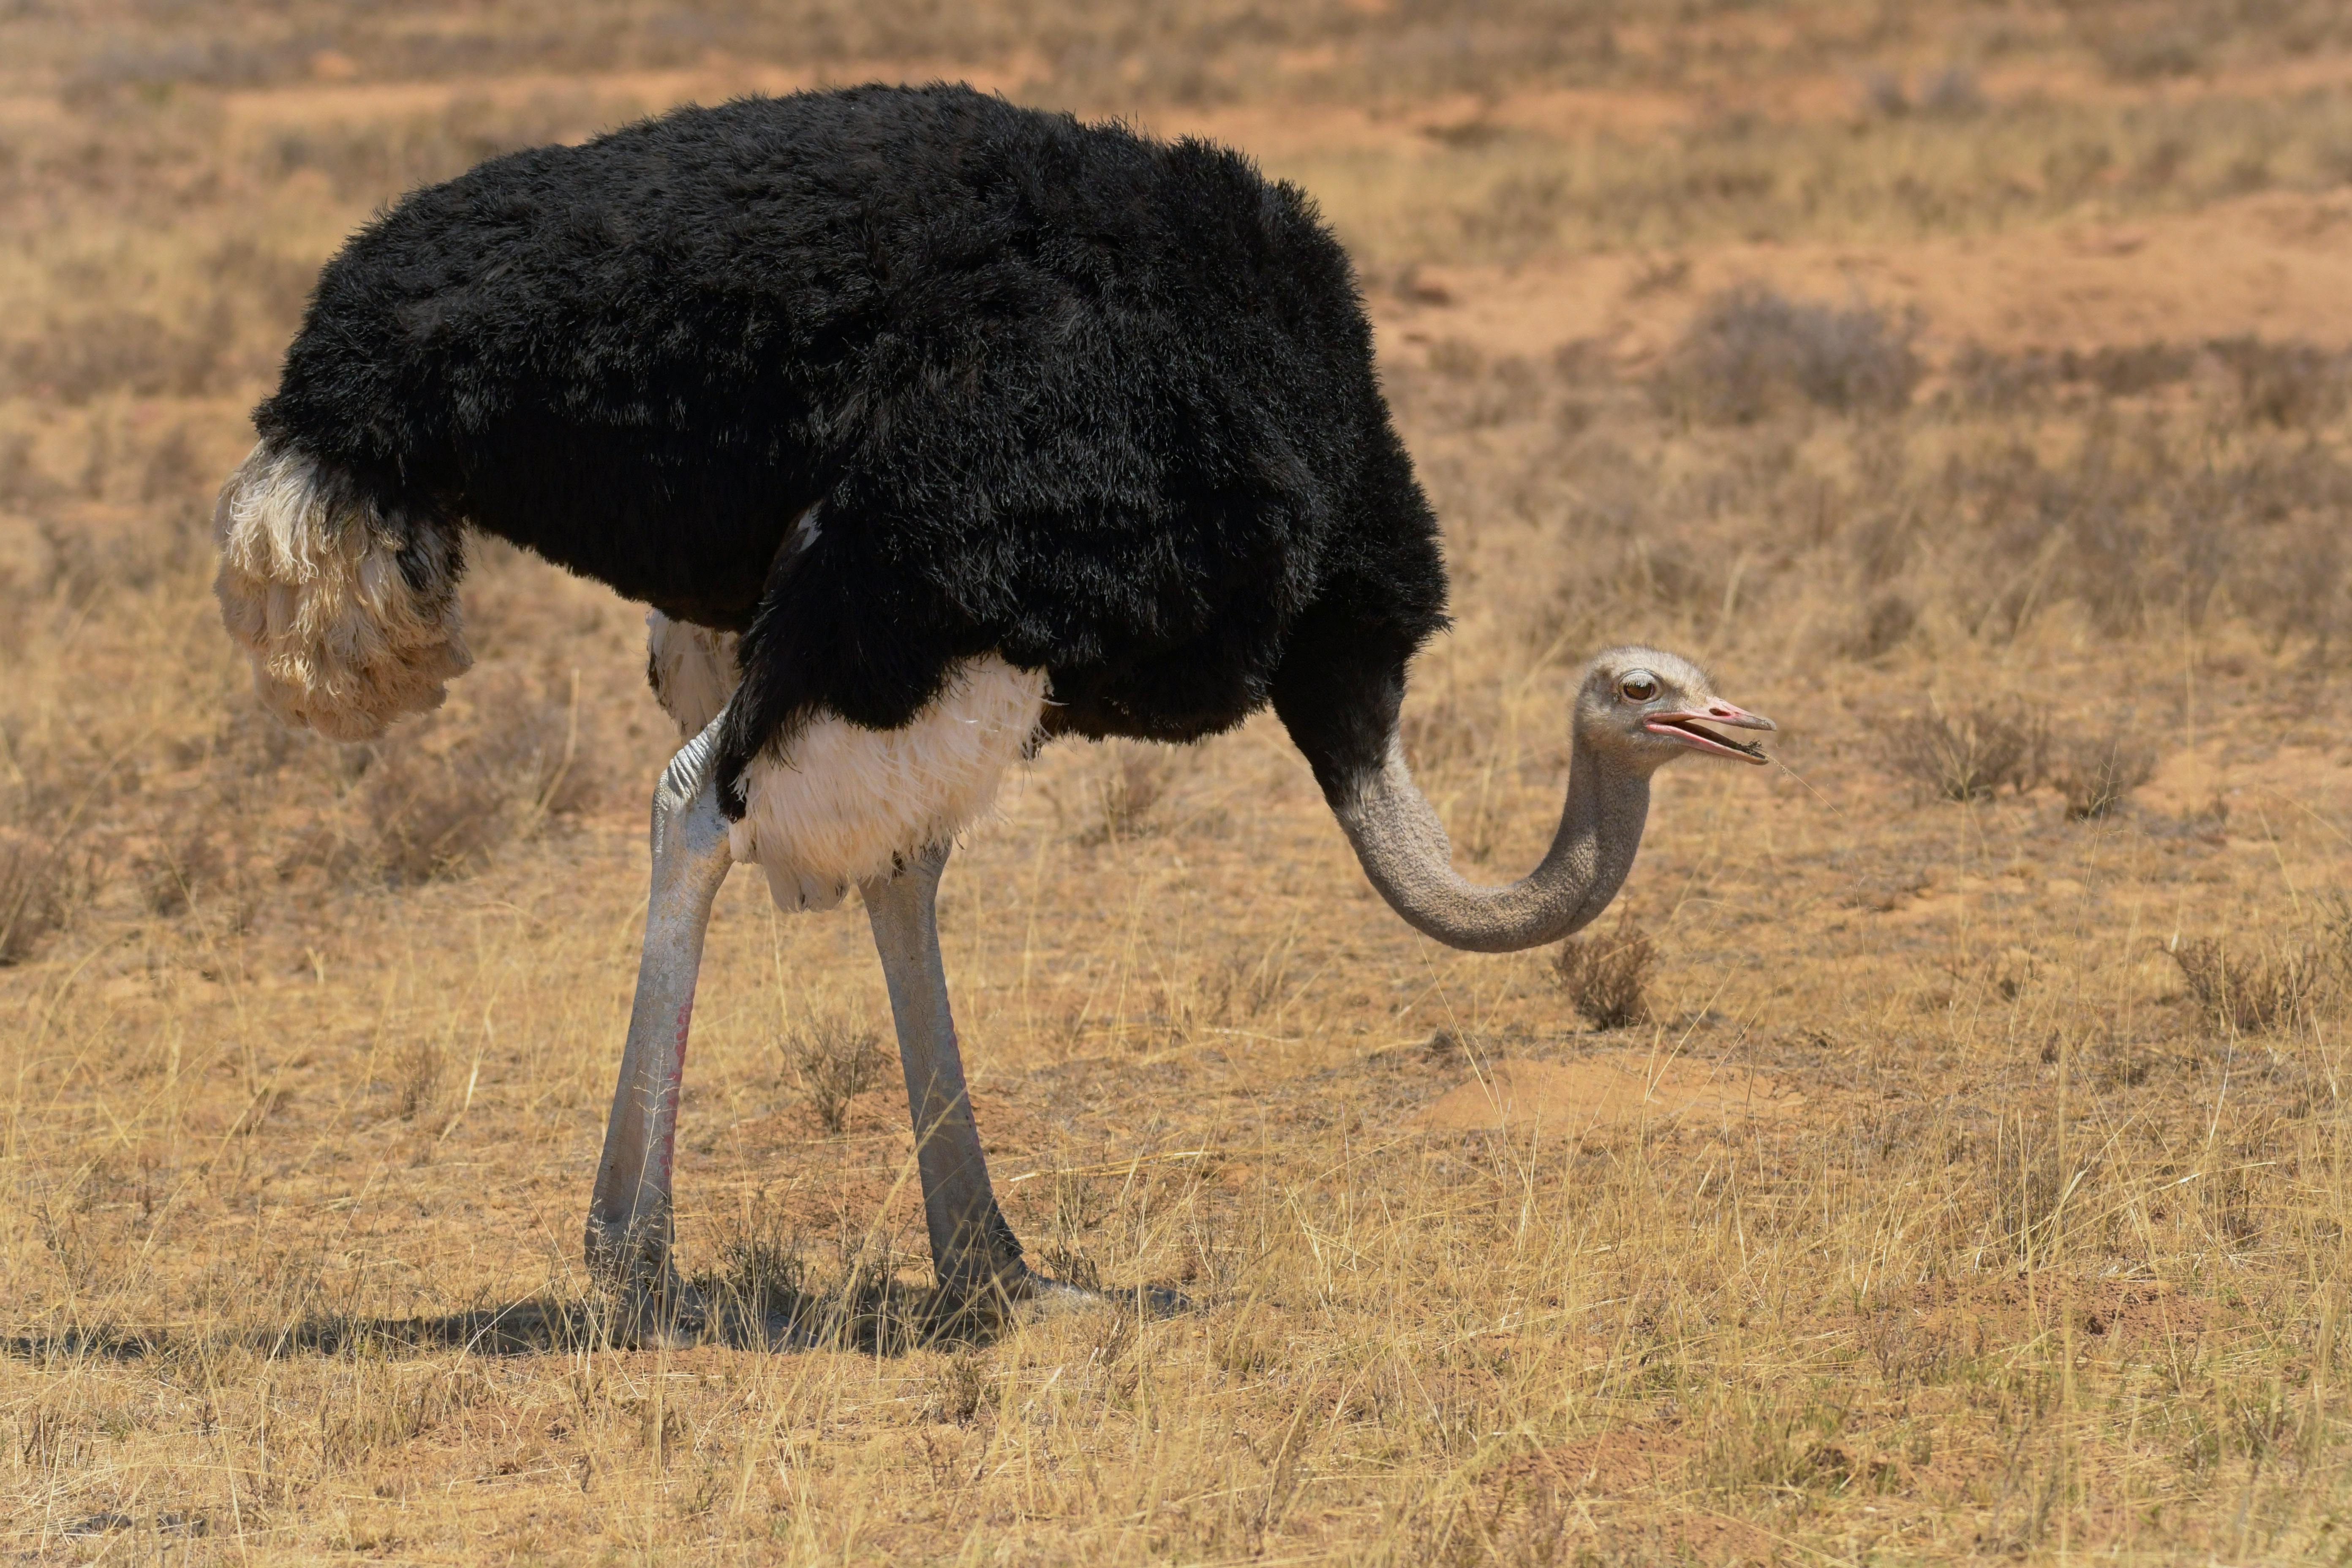 Cute Cartoon Ostrich Wallpaper Background Wallpaper Image For Free Download   Pngtree